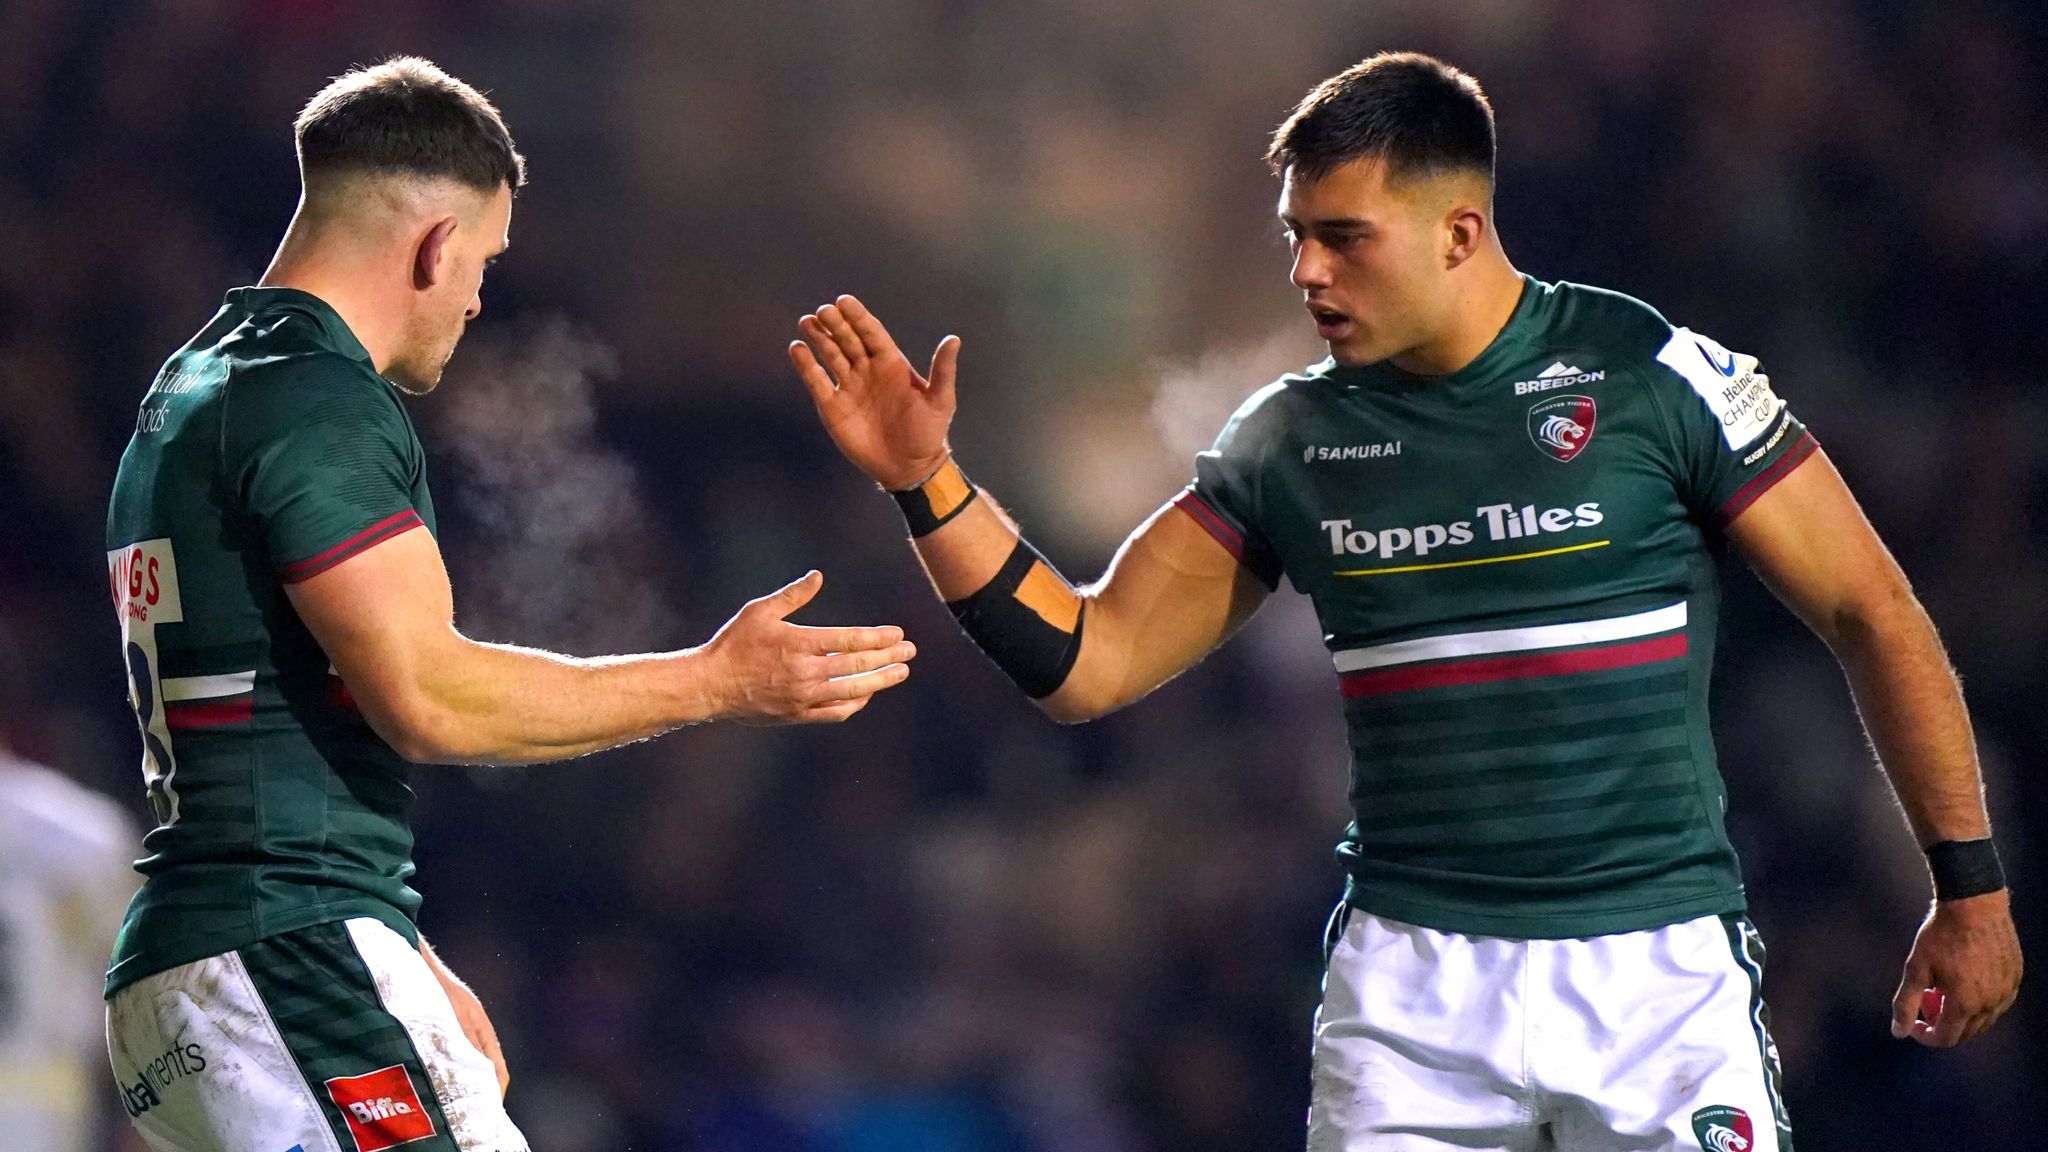 Heineken Champions Cup Ospreys stun Leicester Tigers with late converted try Rugby Union News Sky Sports